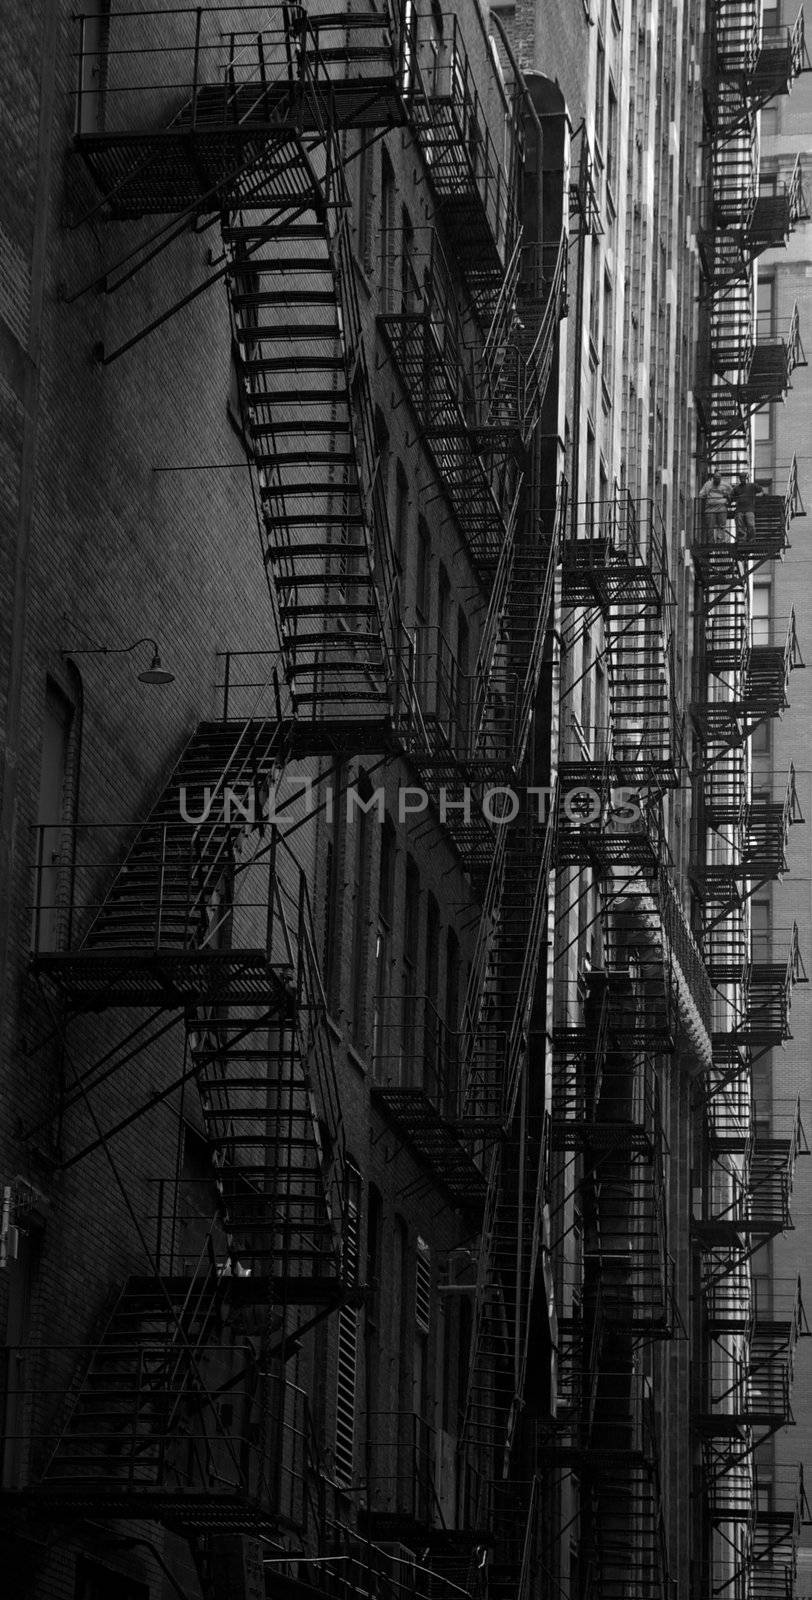 Chicago fire escape ladders in a dark alley in black and white